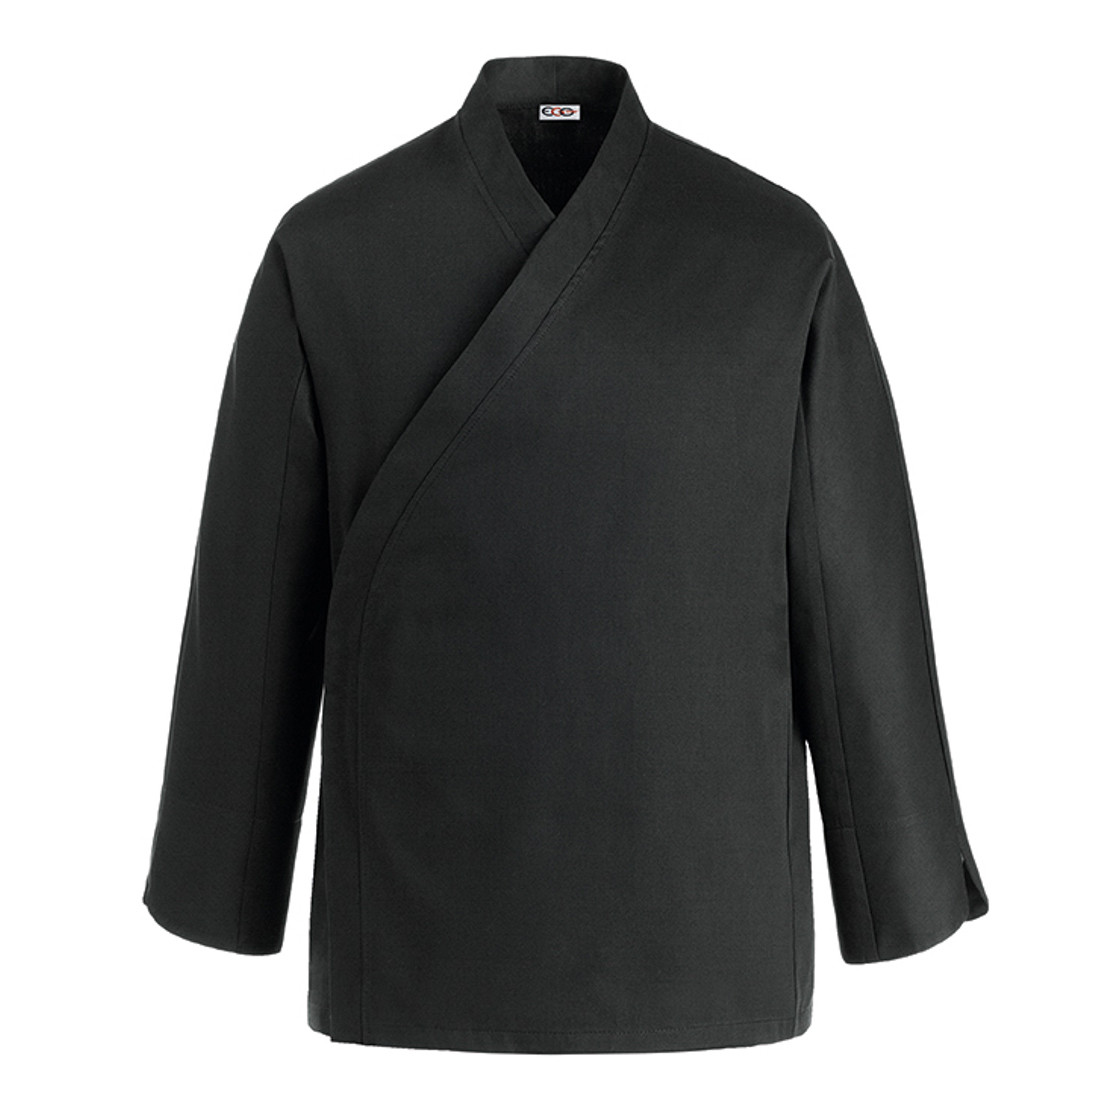 Sushi Chef's Jacket, 65% polyester/35% cotton - Safetywear